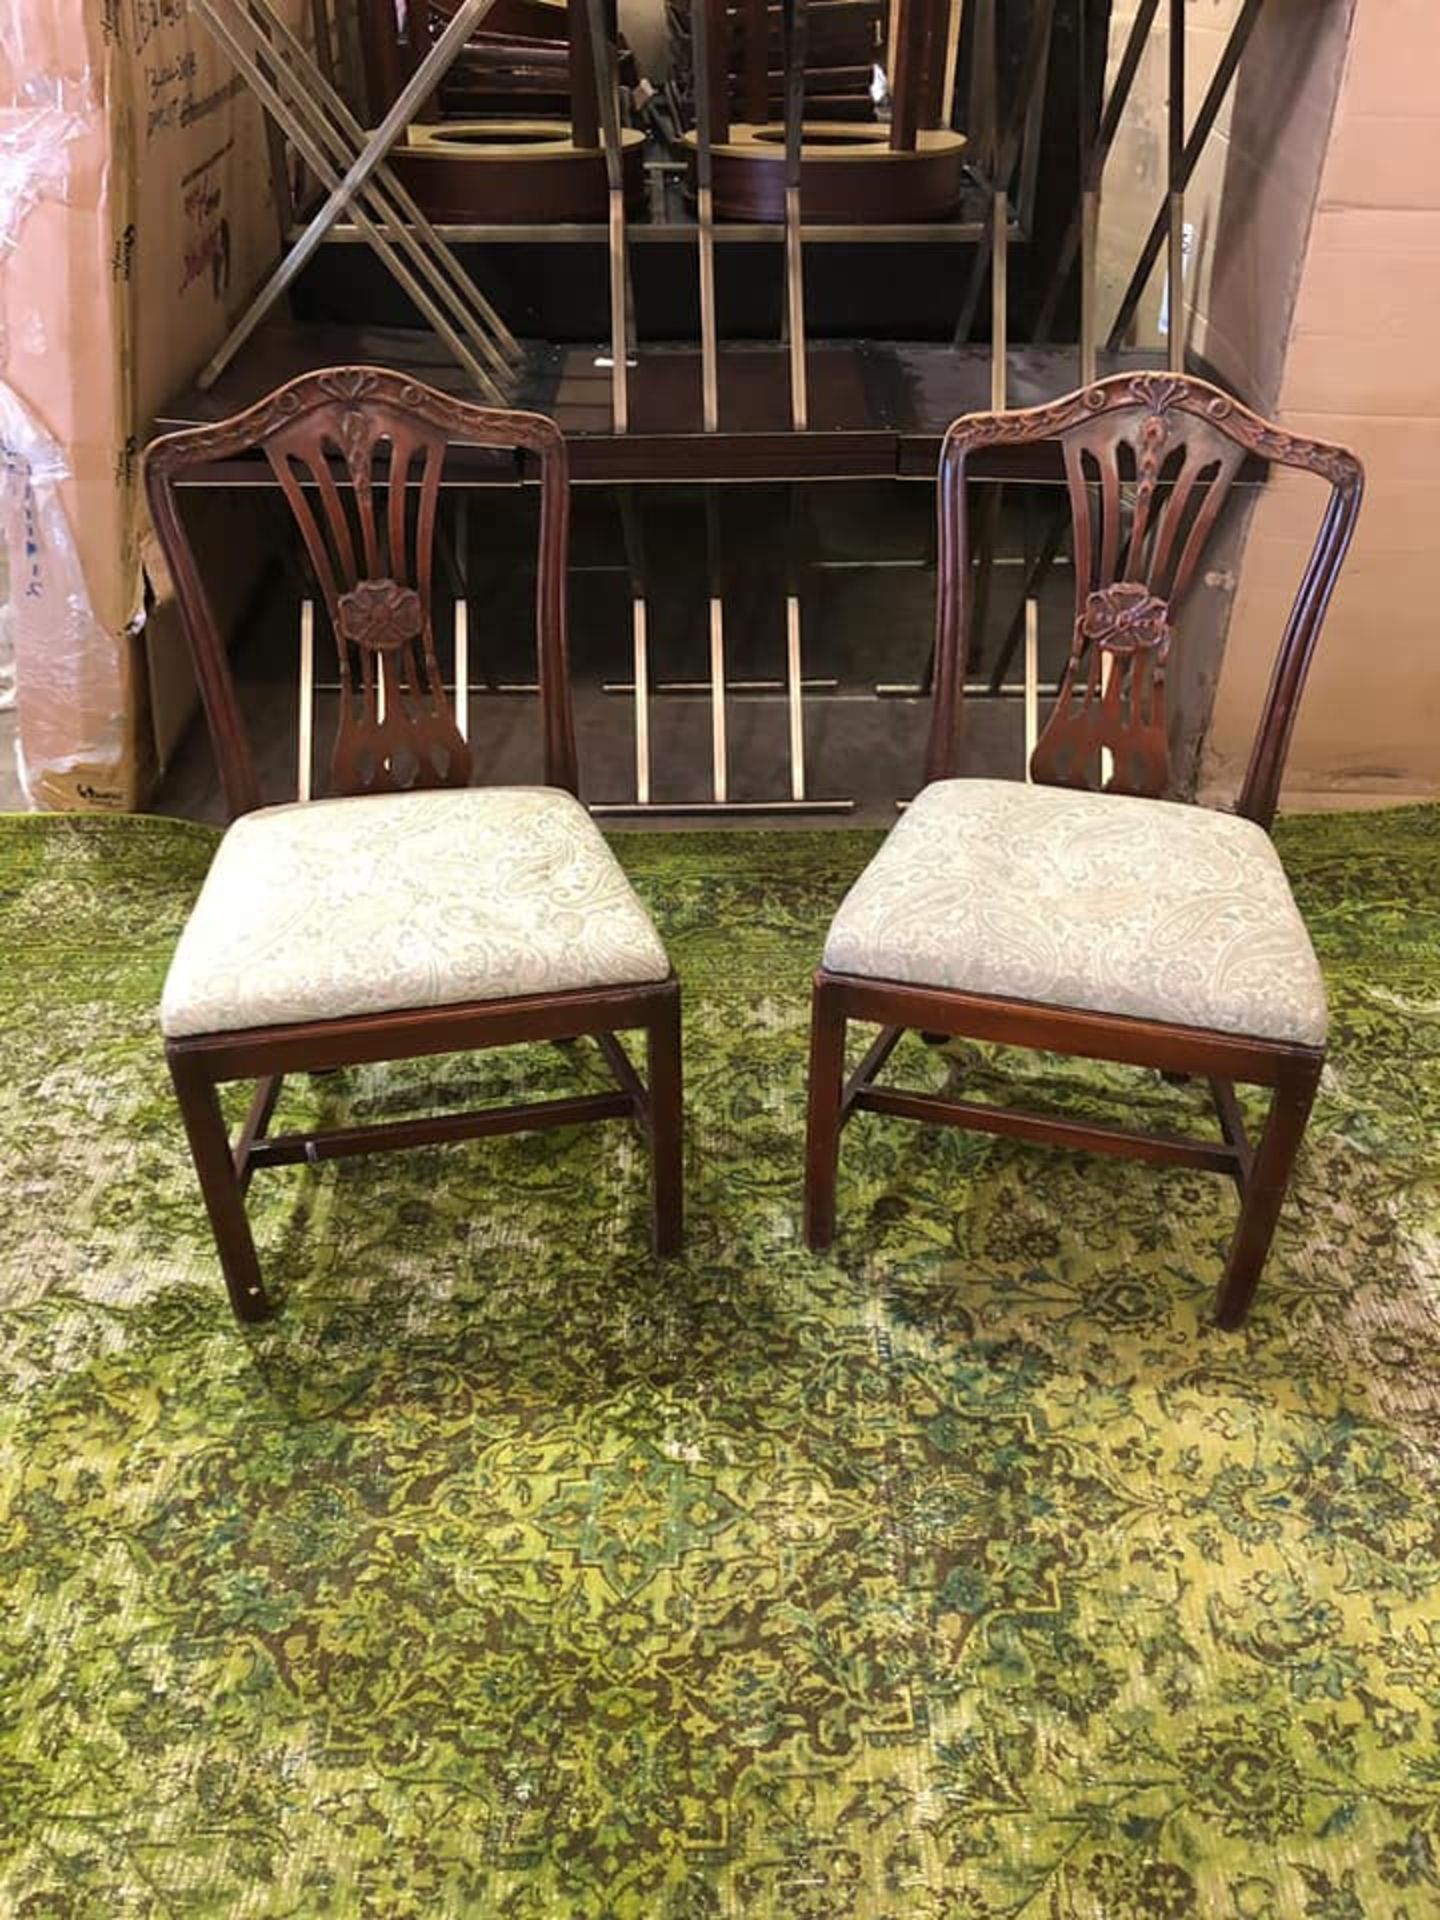 A Pair Of Victoria Styled Chairs Mahogany Frame Features An Arched Crest Rail Over A Pierced Back